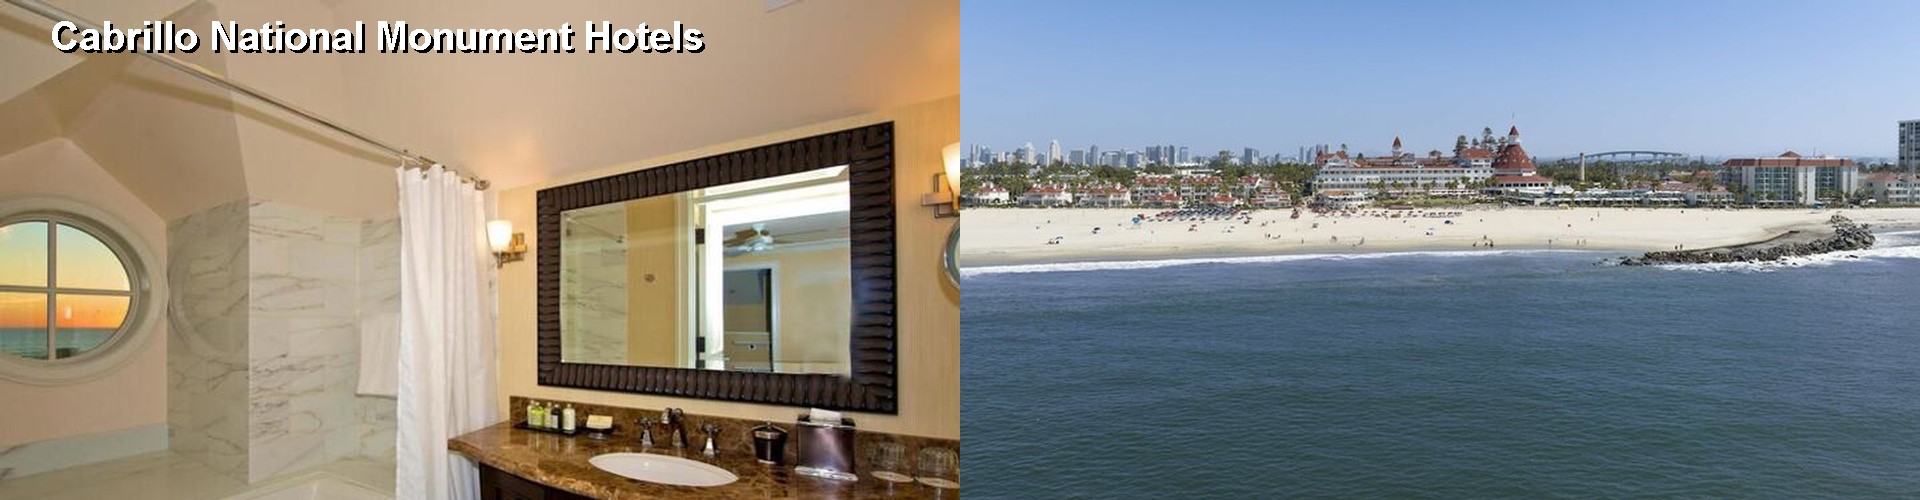 5 Best Hotels near Cabrillo National Monument